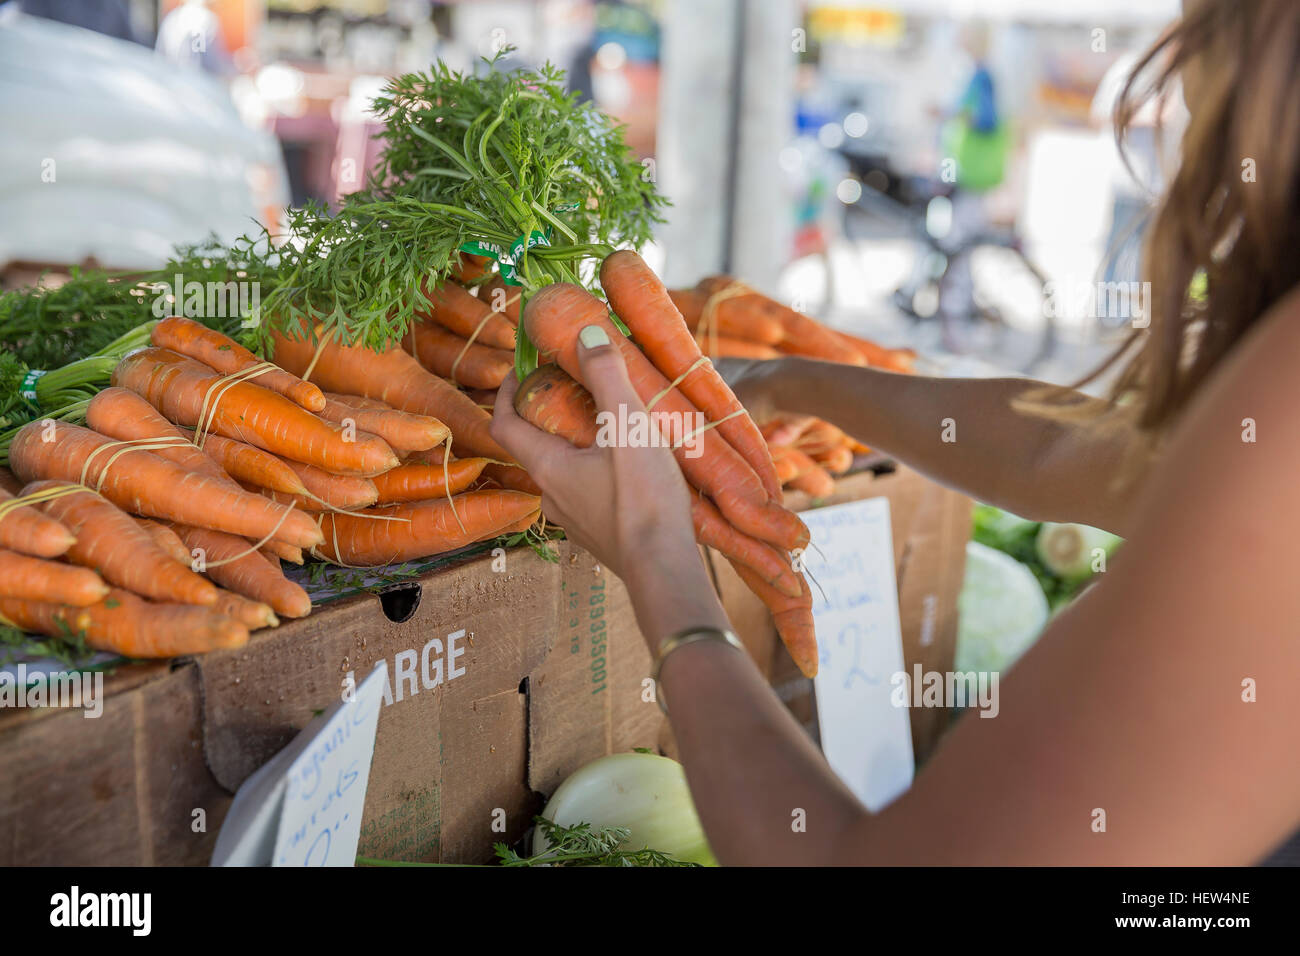 Woman at fruit and vegetable stall selecting carrots Stock Photo